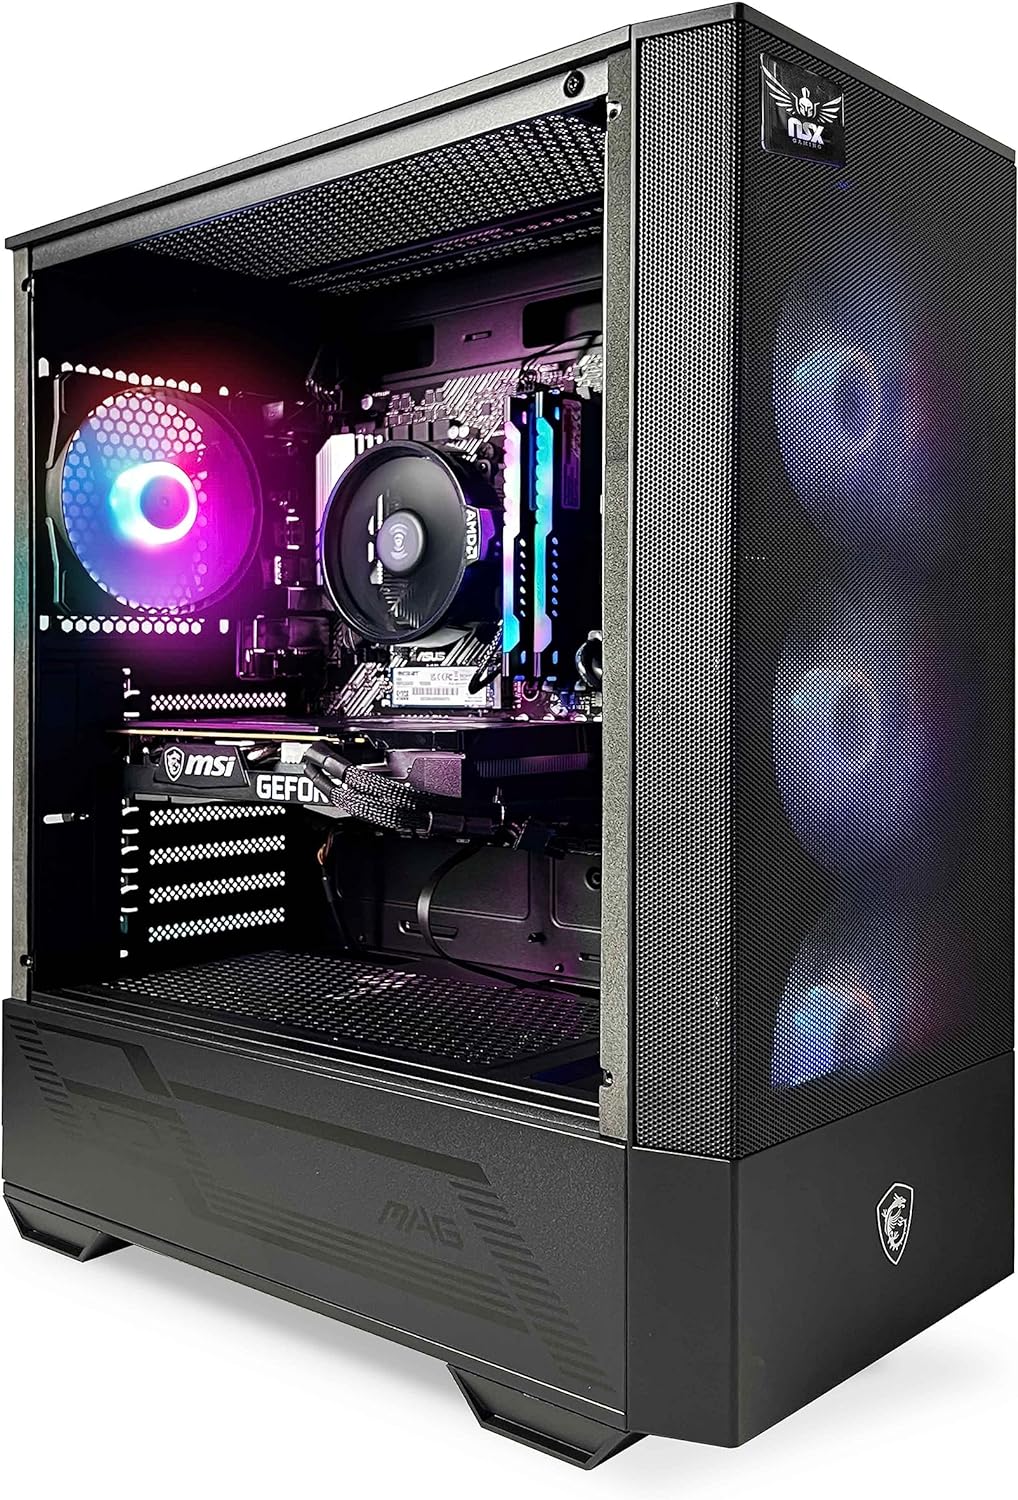 NSX GAMING Desktop PC Ryzen 5 5500,16 GB RAM,SSD 512 gb, RTX 3060,USB-C, Hdmi,Mouse and Keyboard Gamer, Win 11, Built in USA 12 Month Warranty on prebuilt Gaming pc WiFi Ready